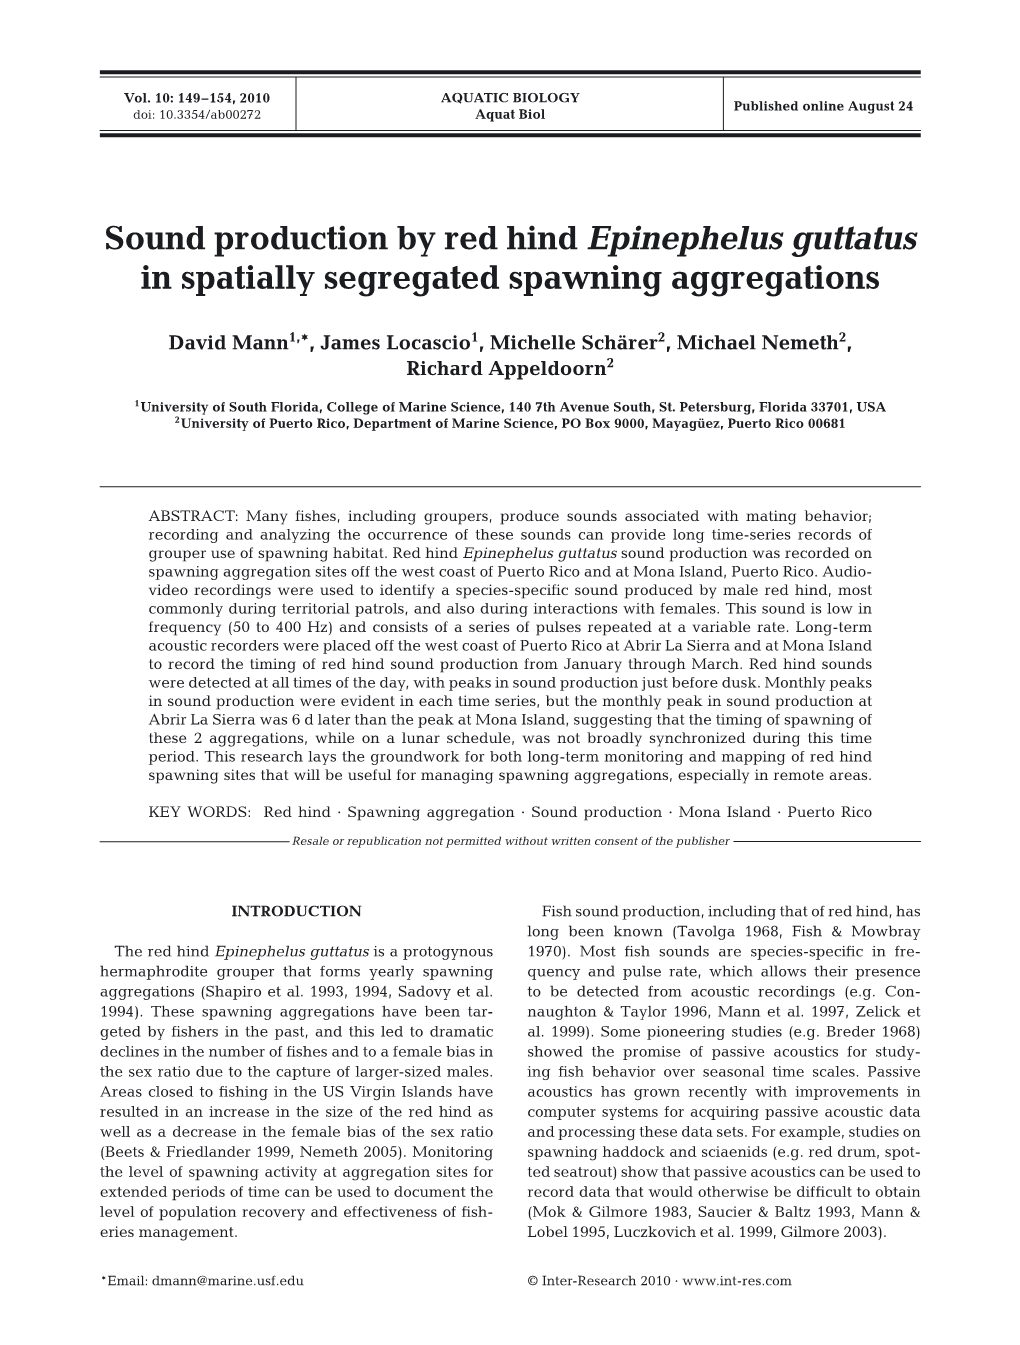 Sound Production by Red Hind Epinephelus Guttatus in Spatially Segregated Spawning Aggregations